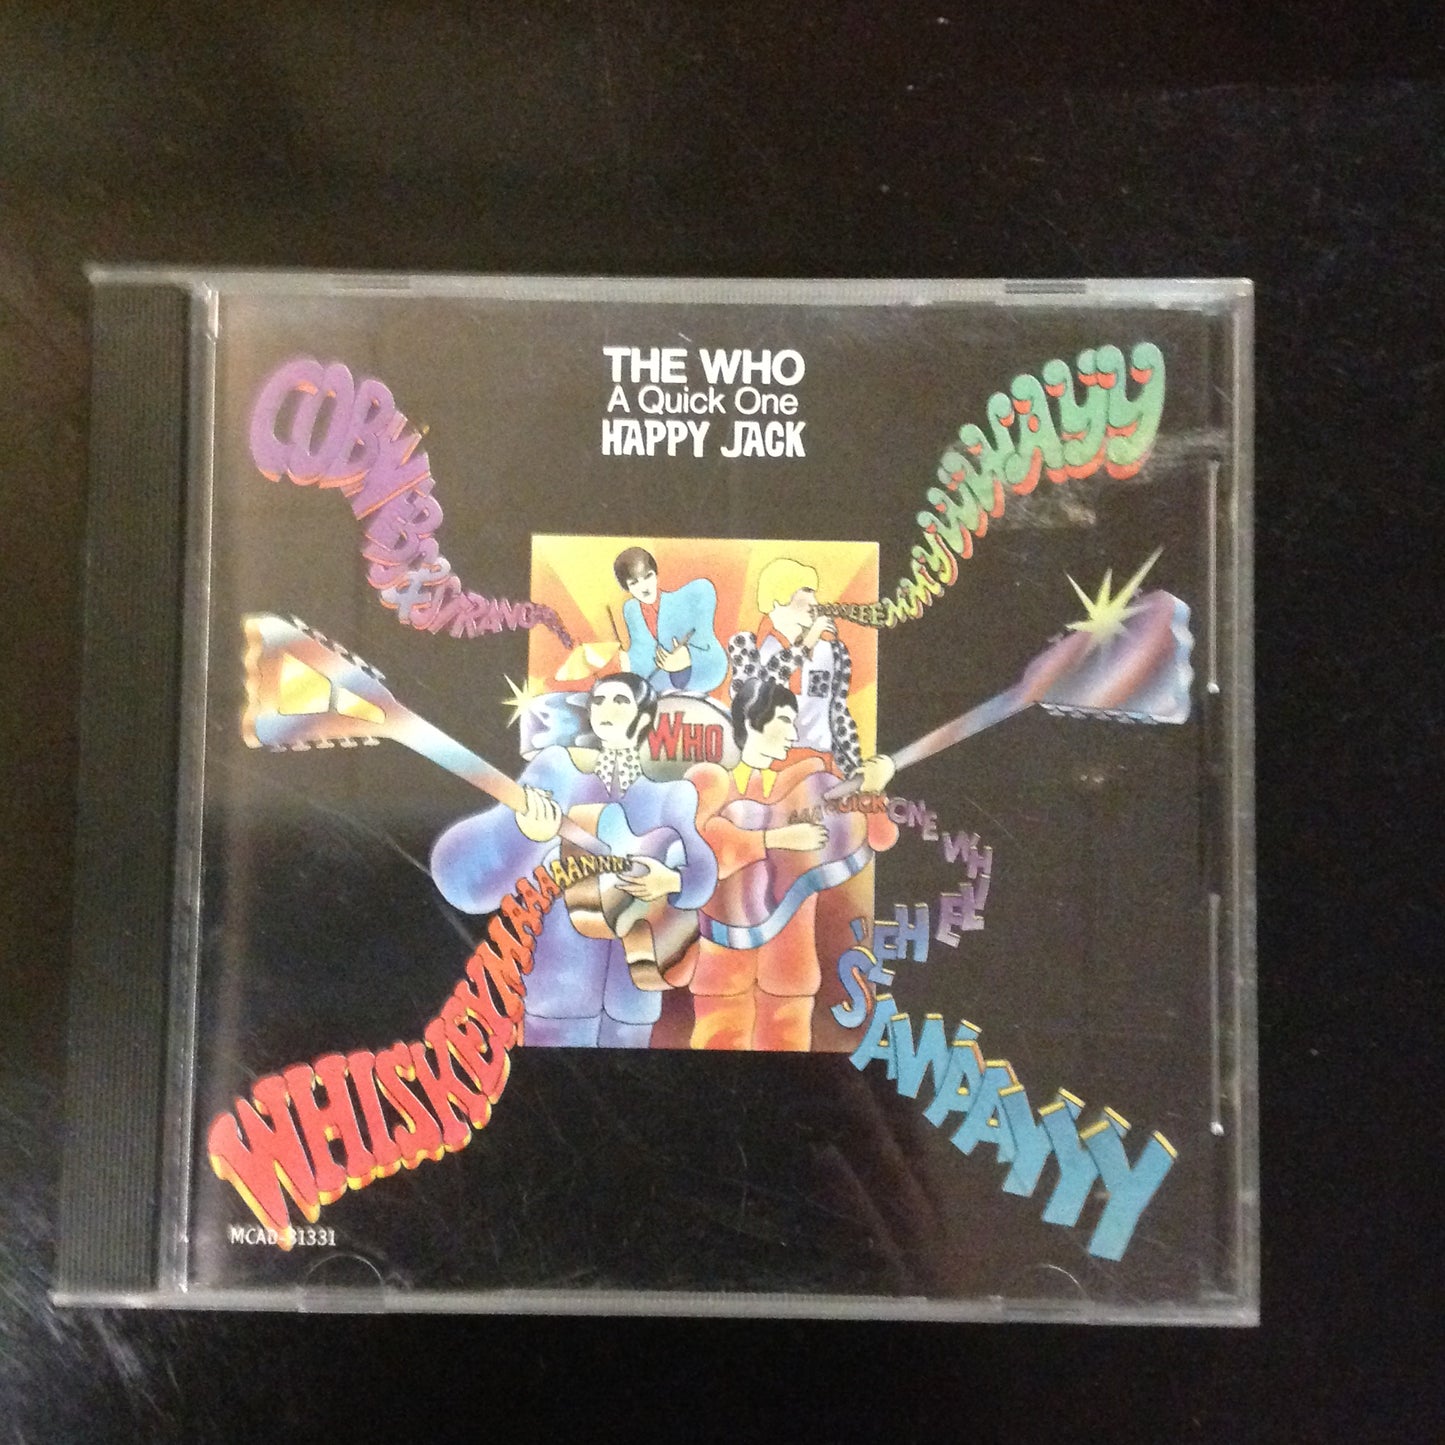 CD The Who A Quick One ( Happy Jack ) MCAD-31331 RARE